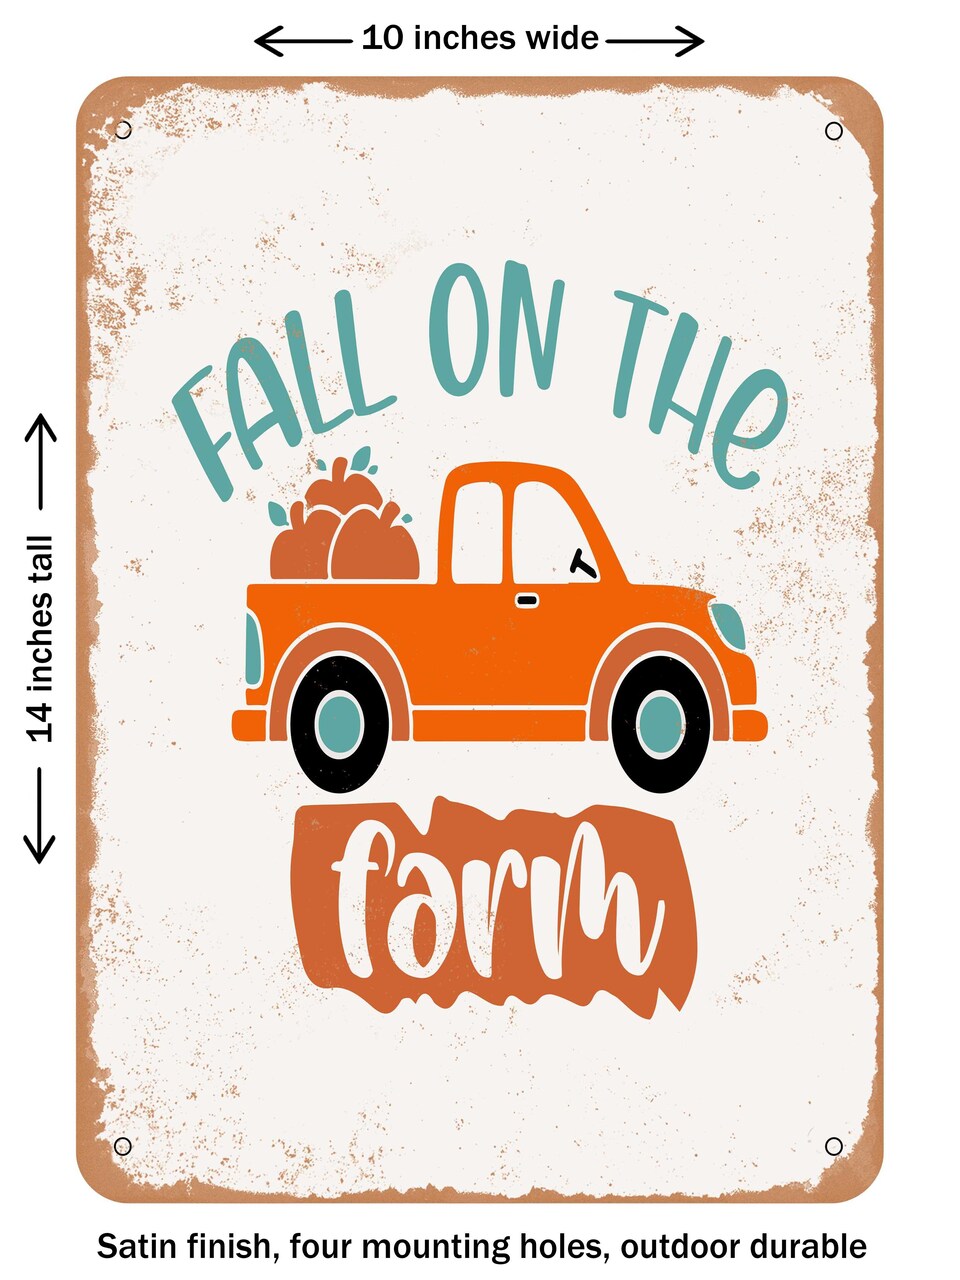 DECORATIVE METAL SIGN - Fall On the Farm - Vintage Rusty Look